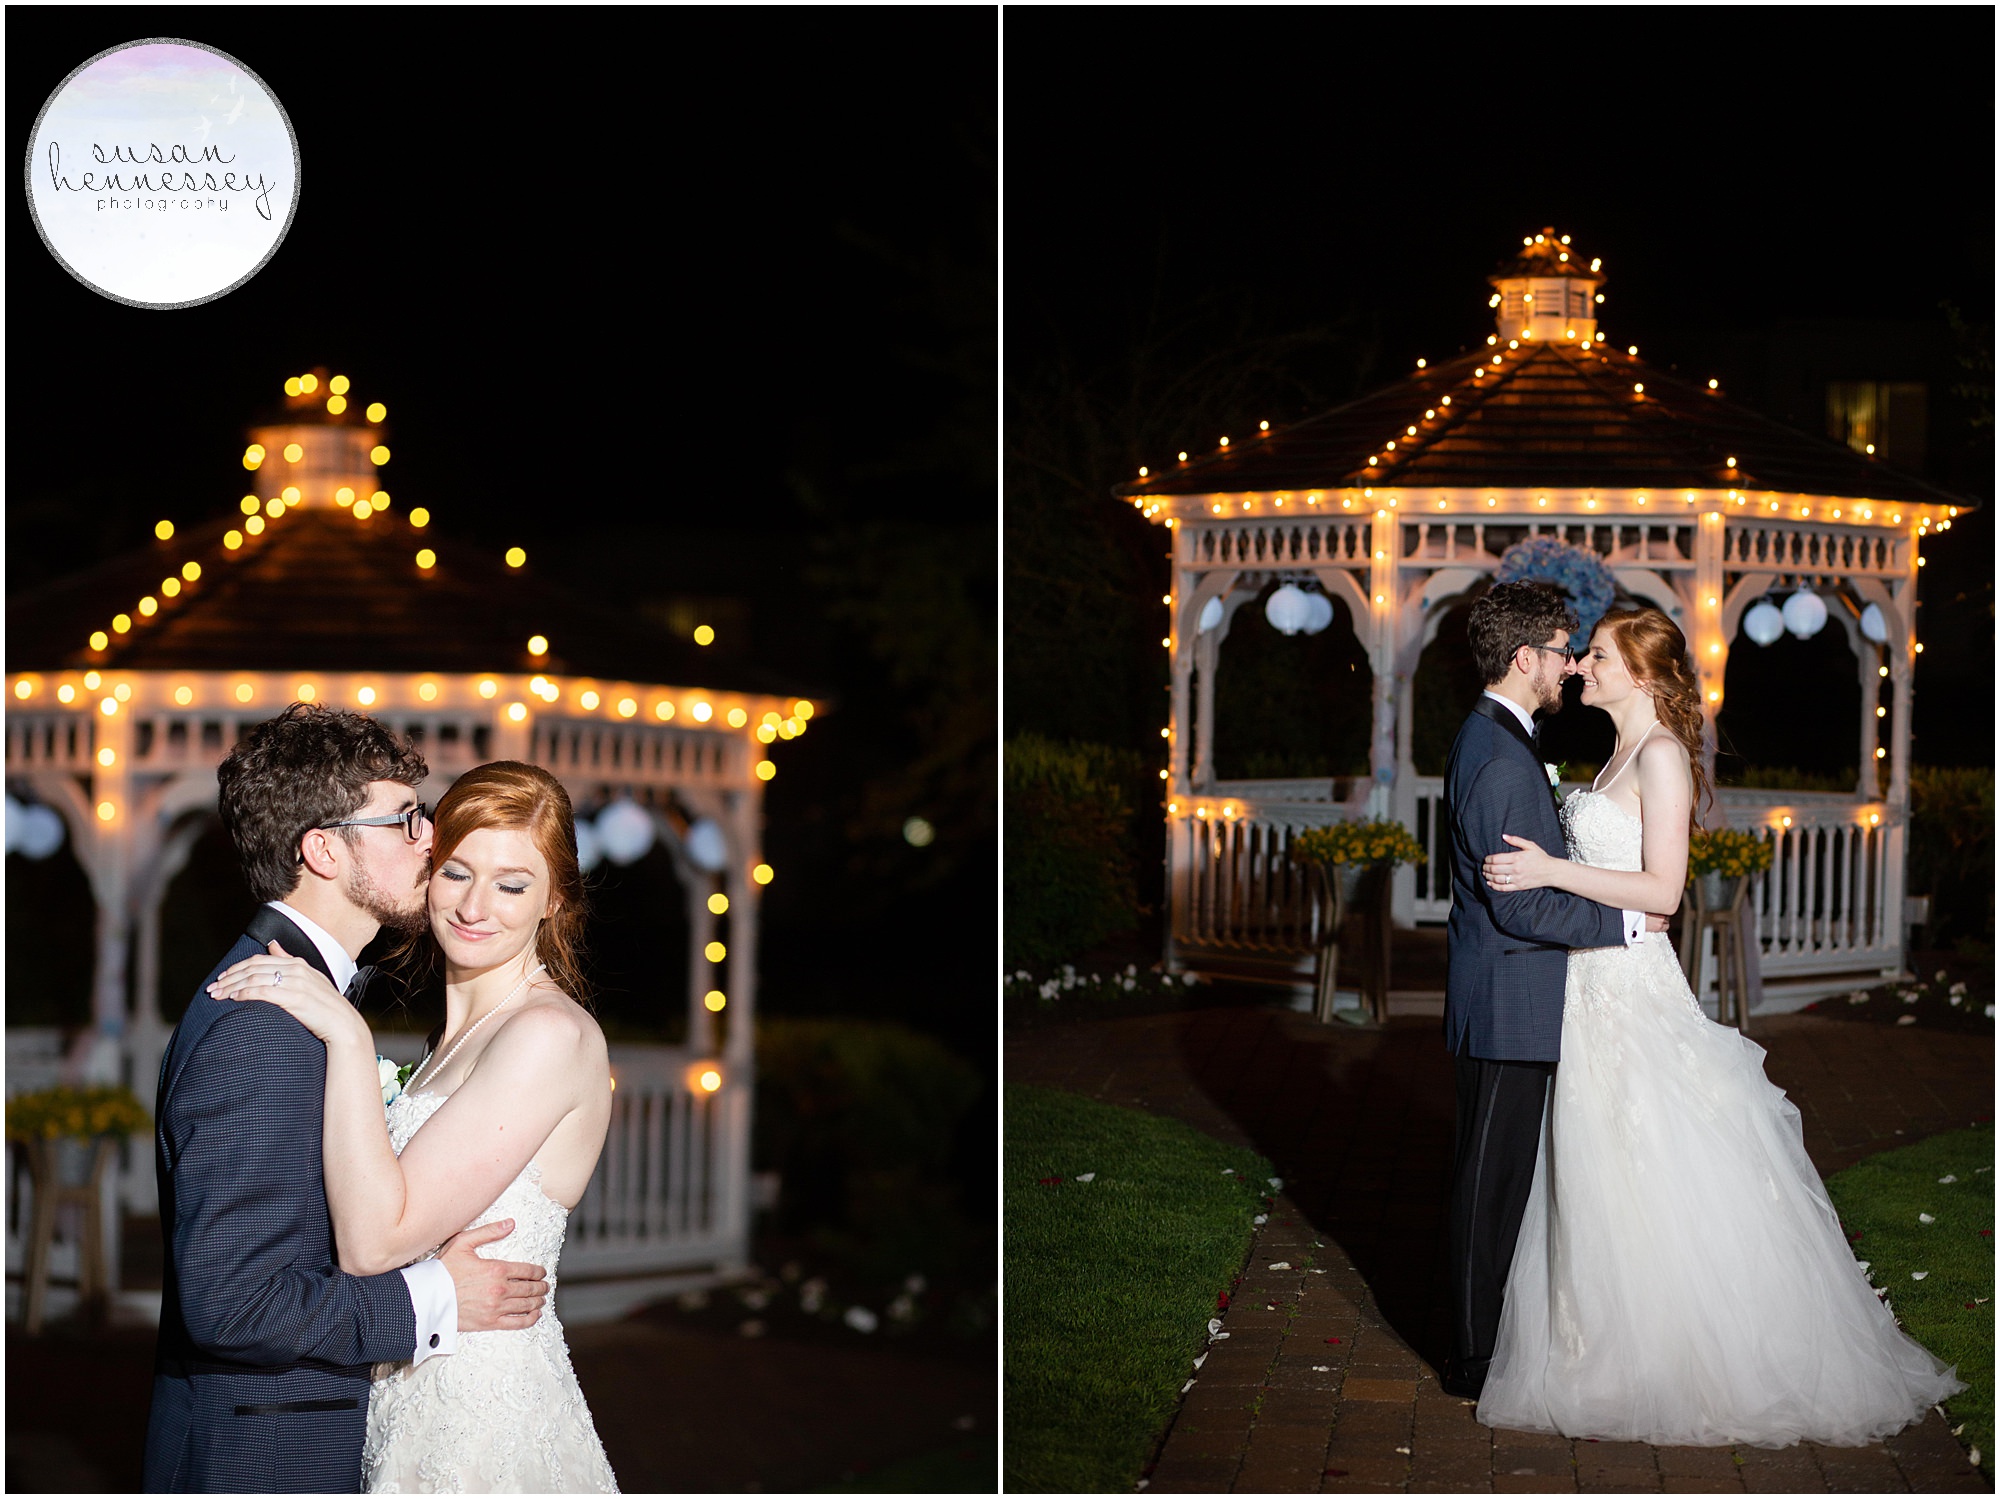 Night portrait at Greate Bay Country Club wedding